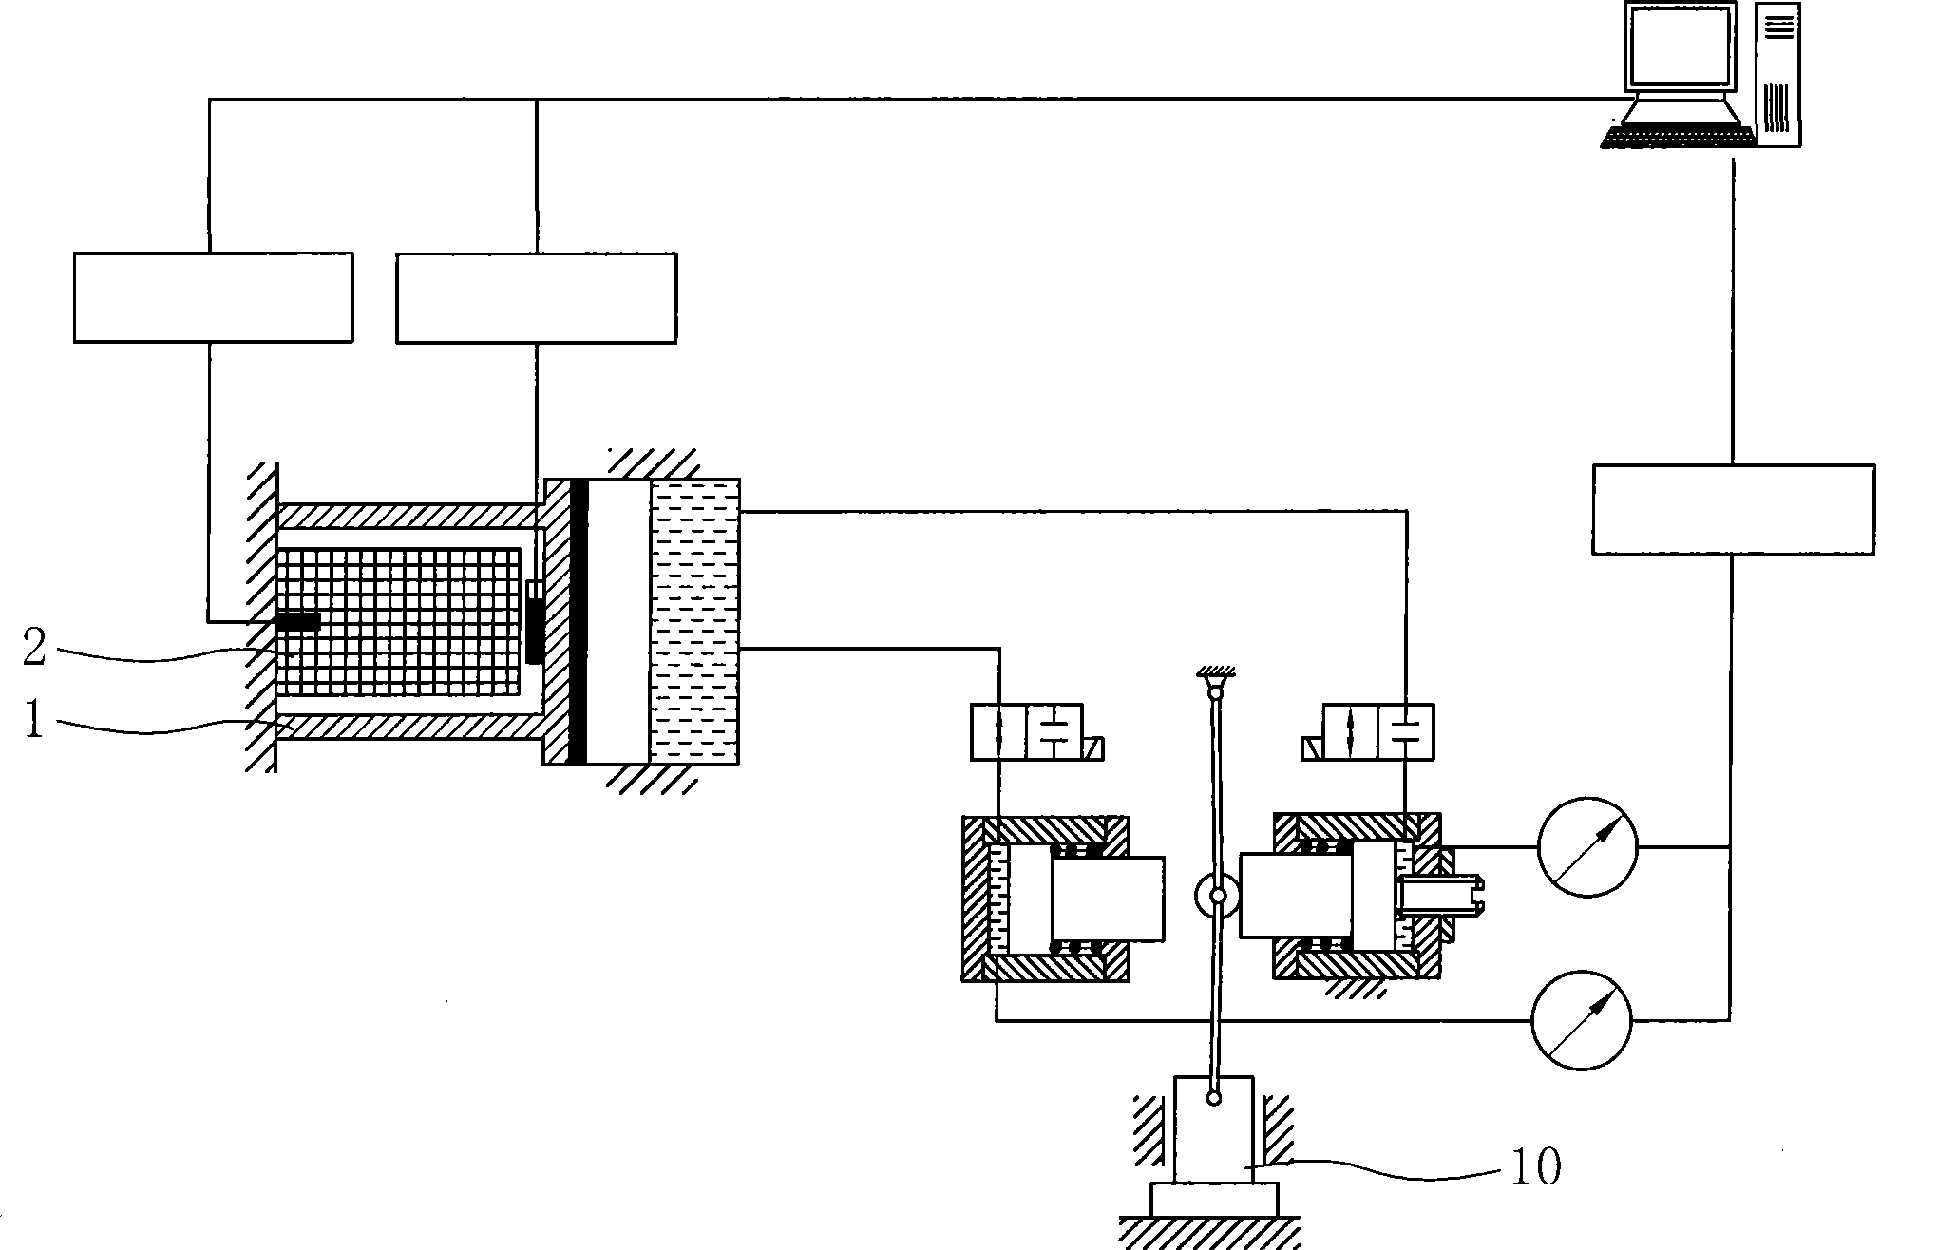 Self locking device for clamping articles